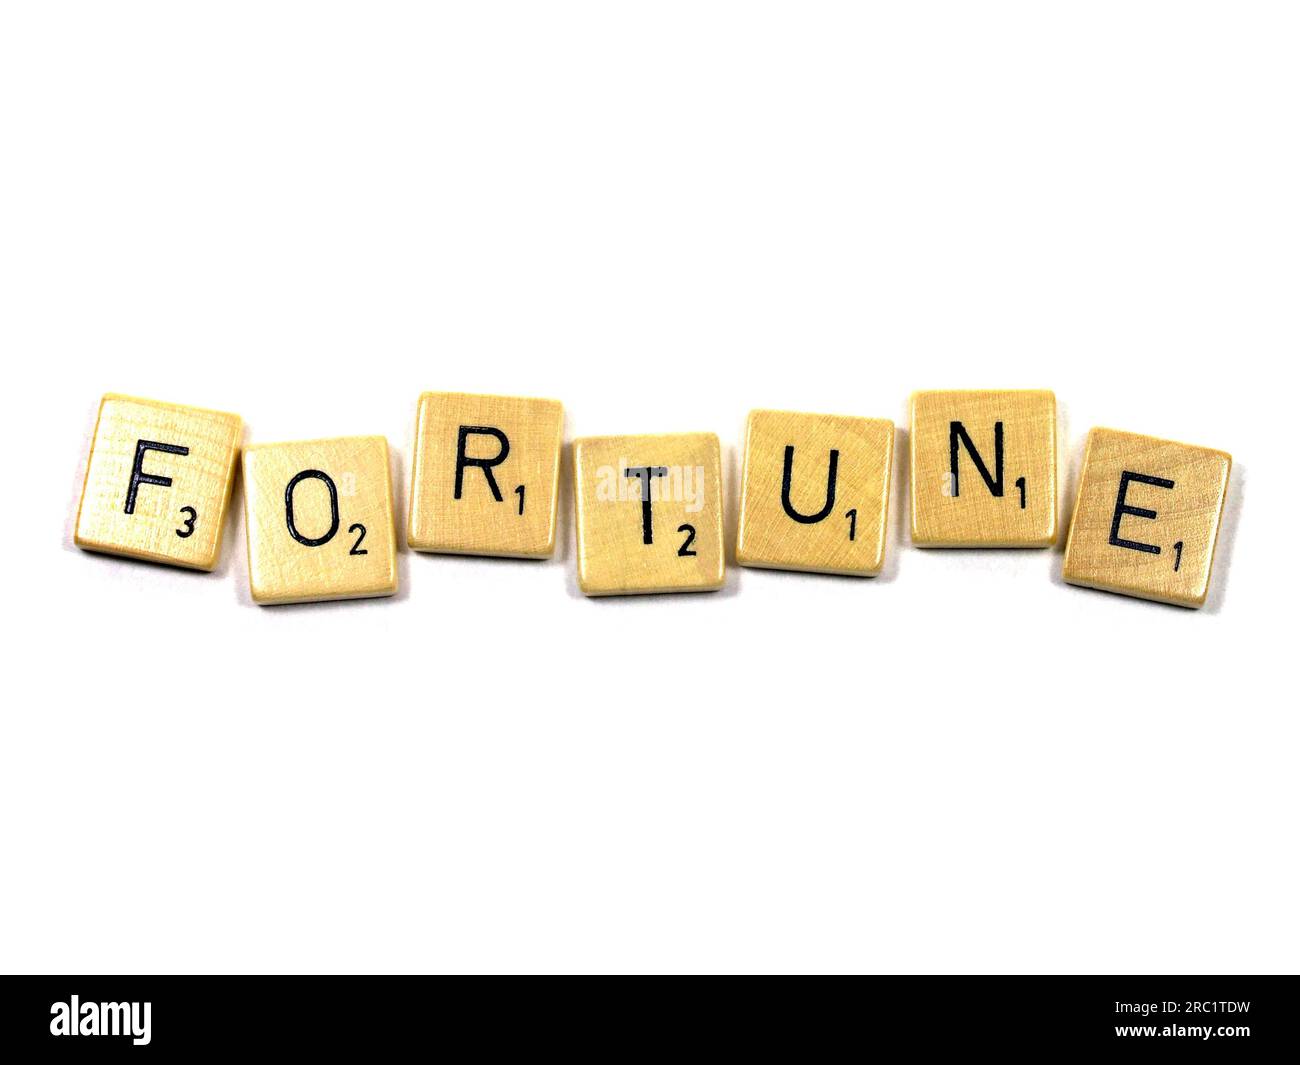 Fortune written with scrabble stones Stock Photo